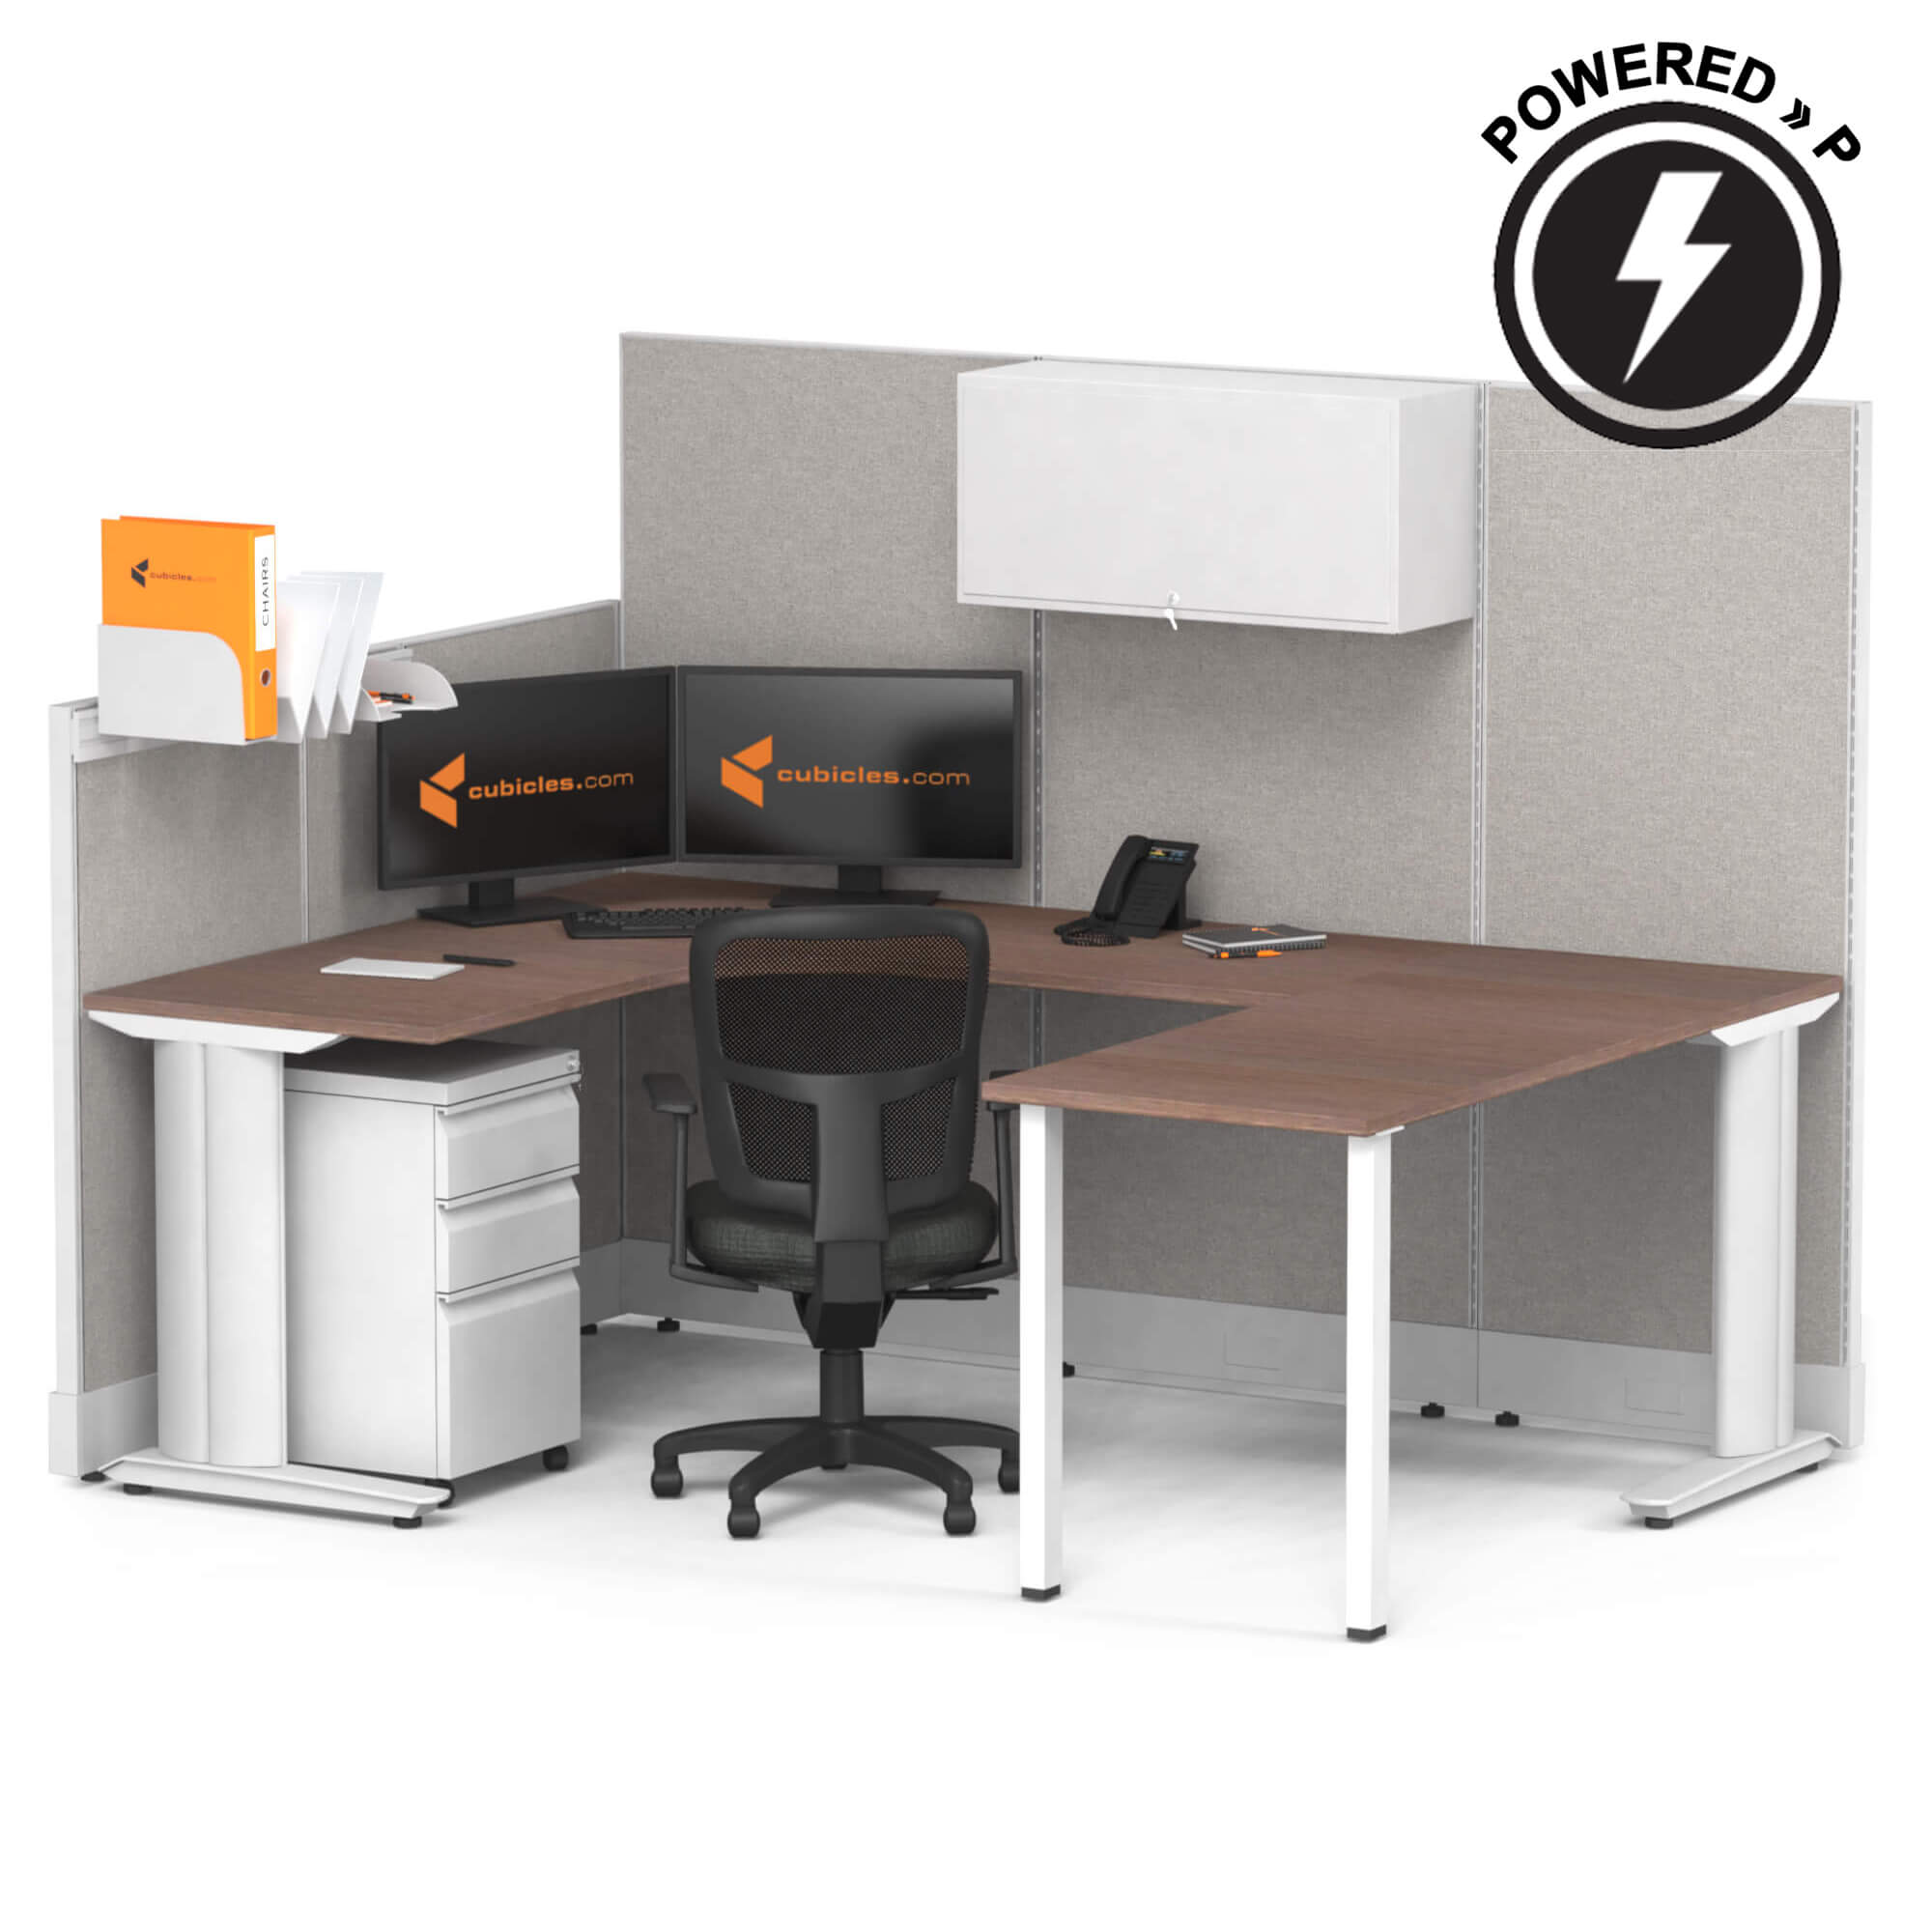 cubicle-desk-u-shaped-with-storage-1pack-powered-sign.jpg